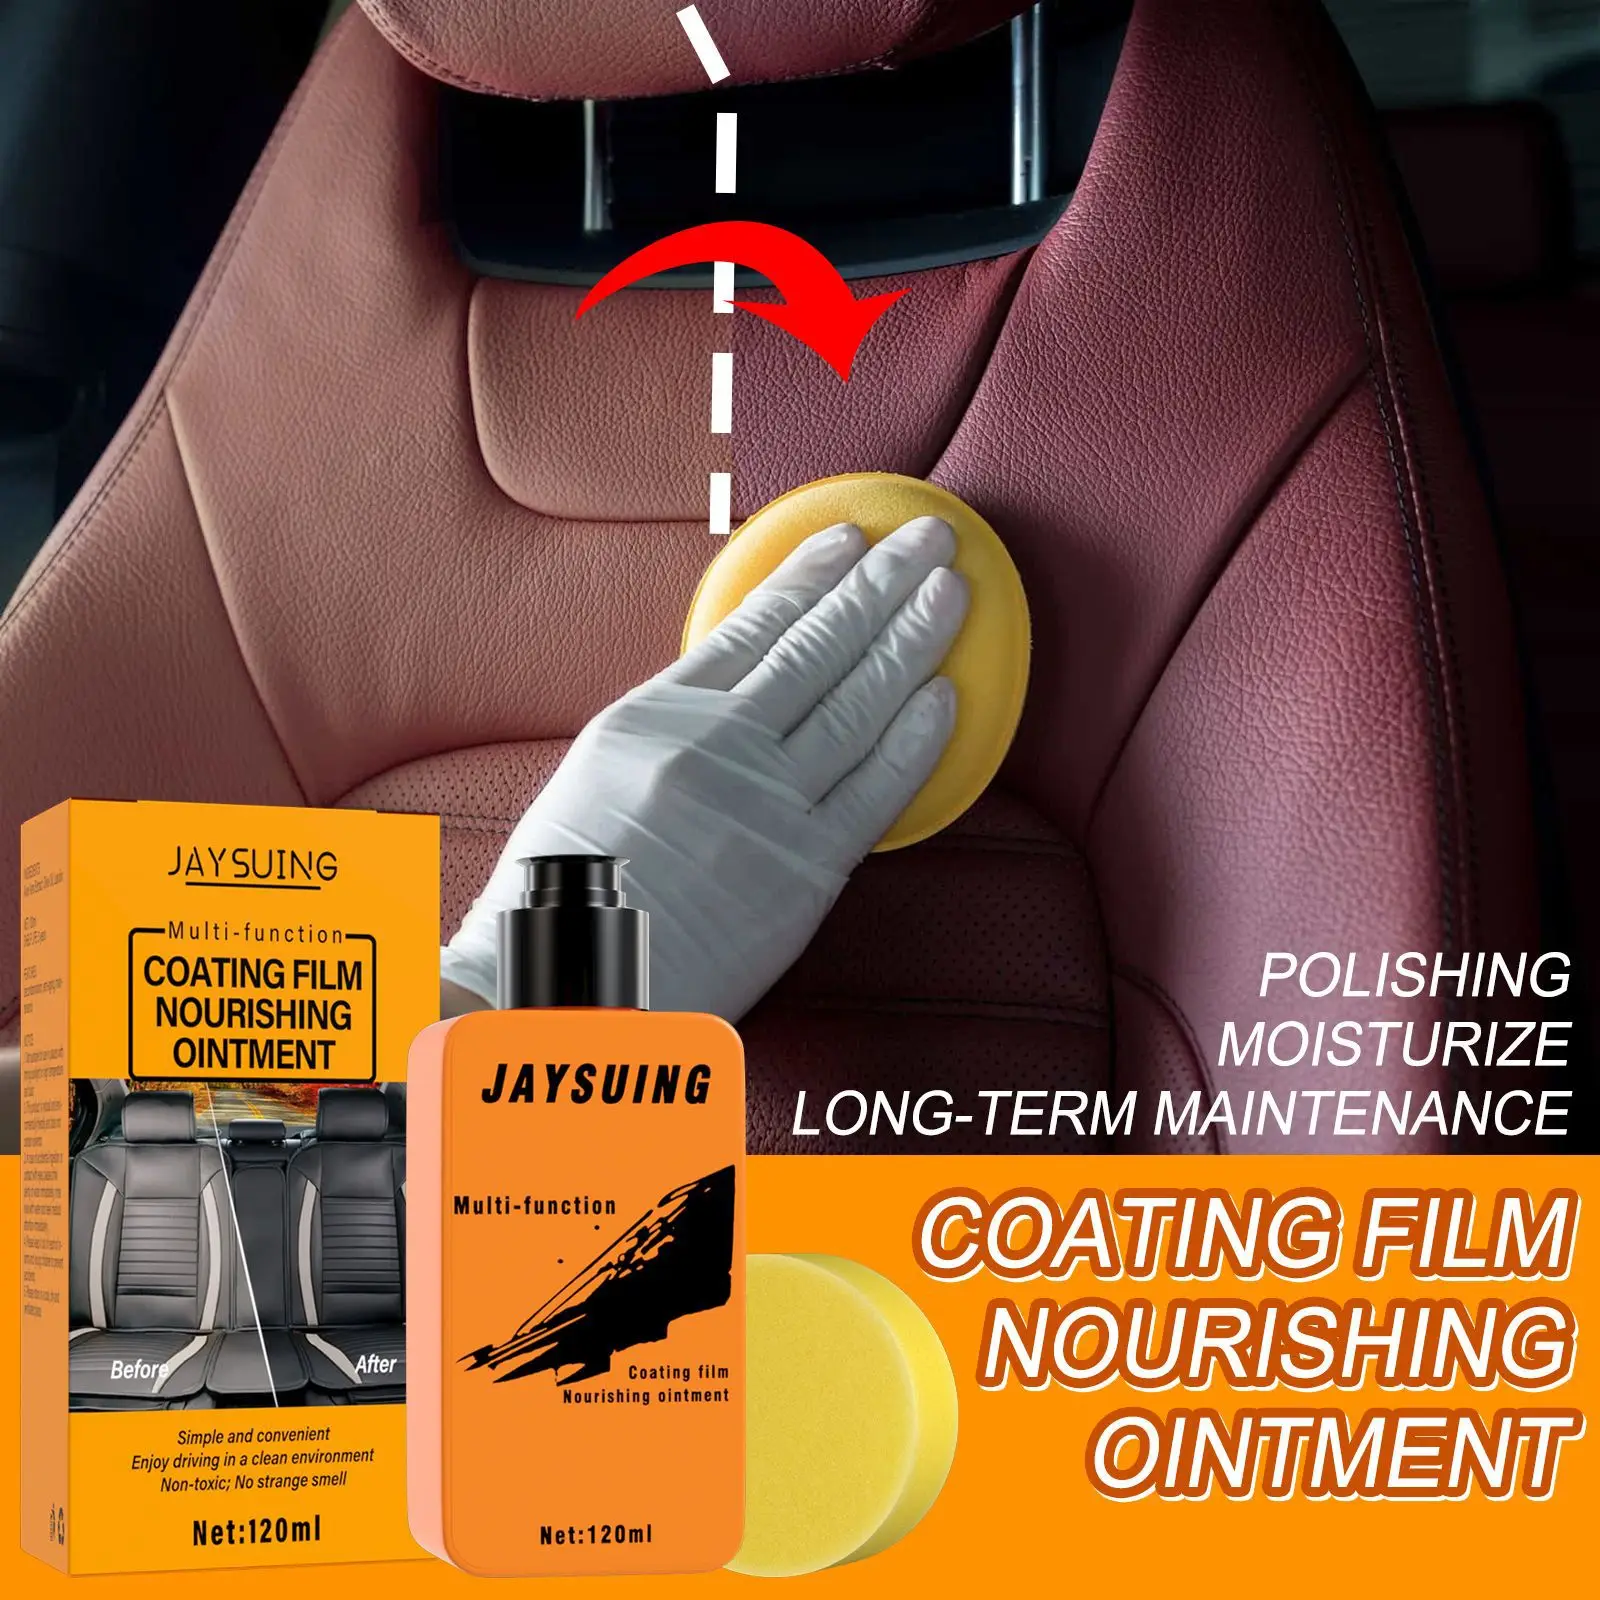 Car Leather Cleaner 500ml Car Cleaning Kit Interior Leather Conditioner  Supplies Refurbishment Agent Effective For Carpet - AliExpress